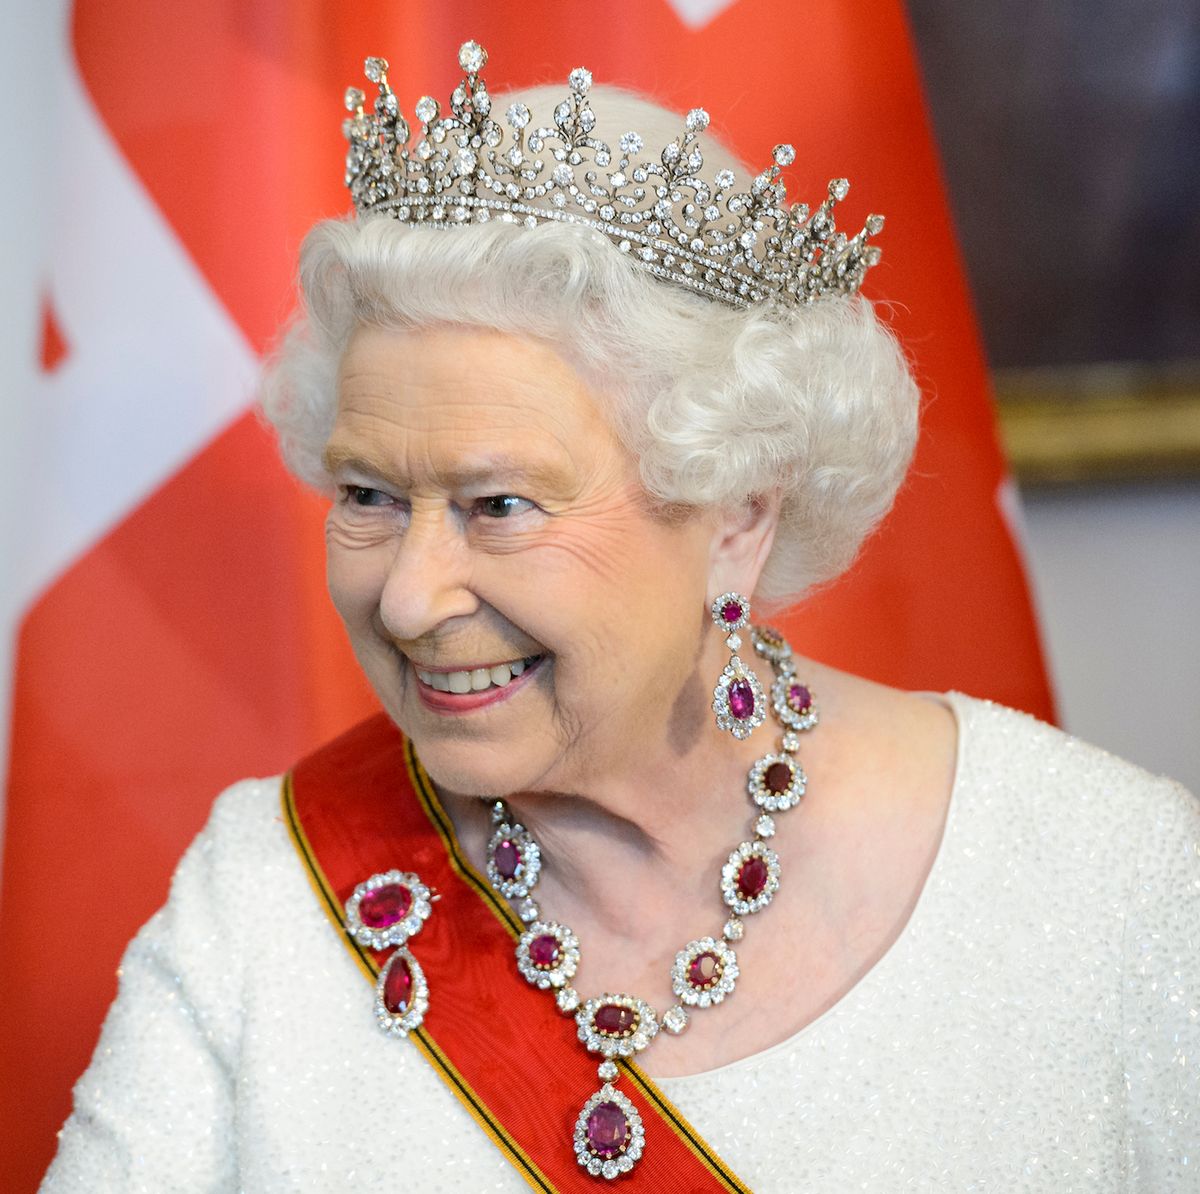 All the random things owned by Queen Elizabeth (swans included)